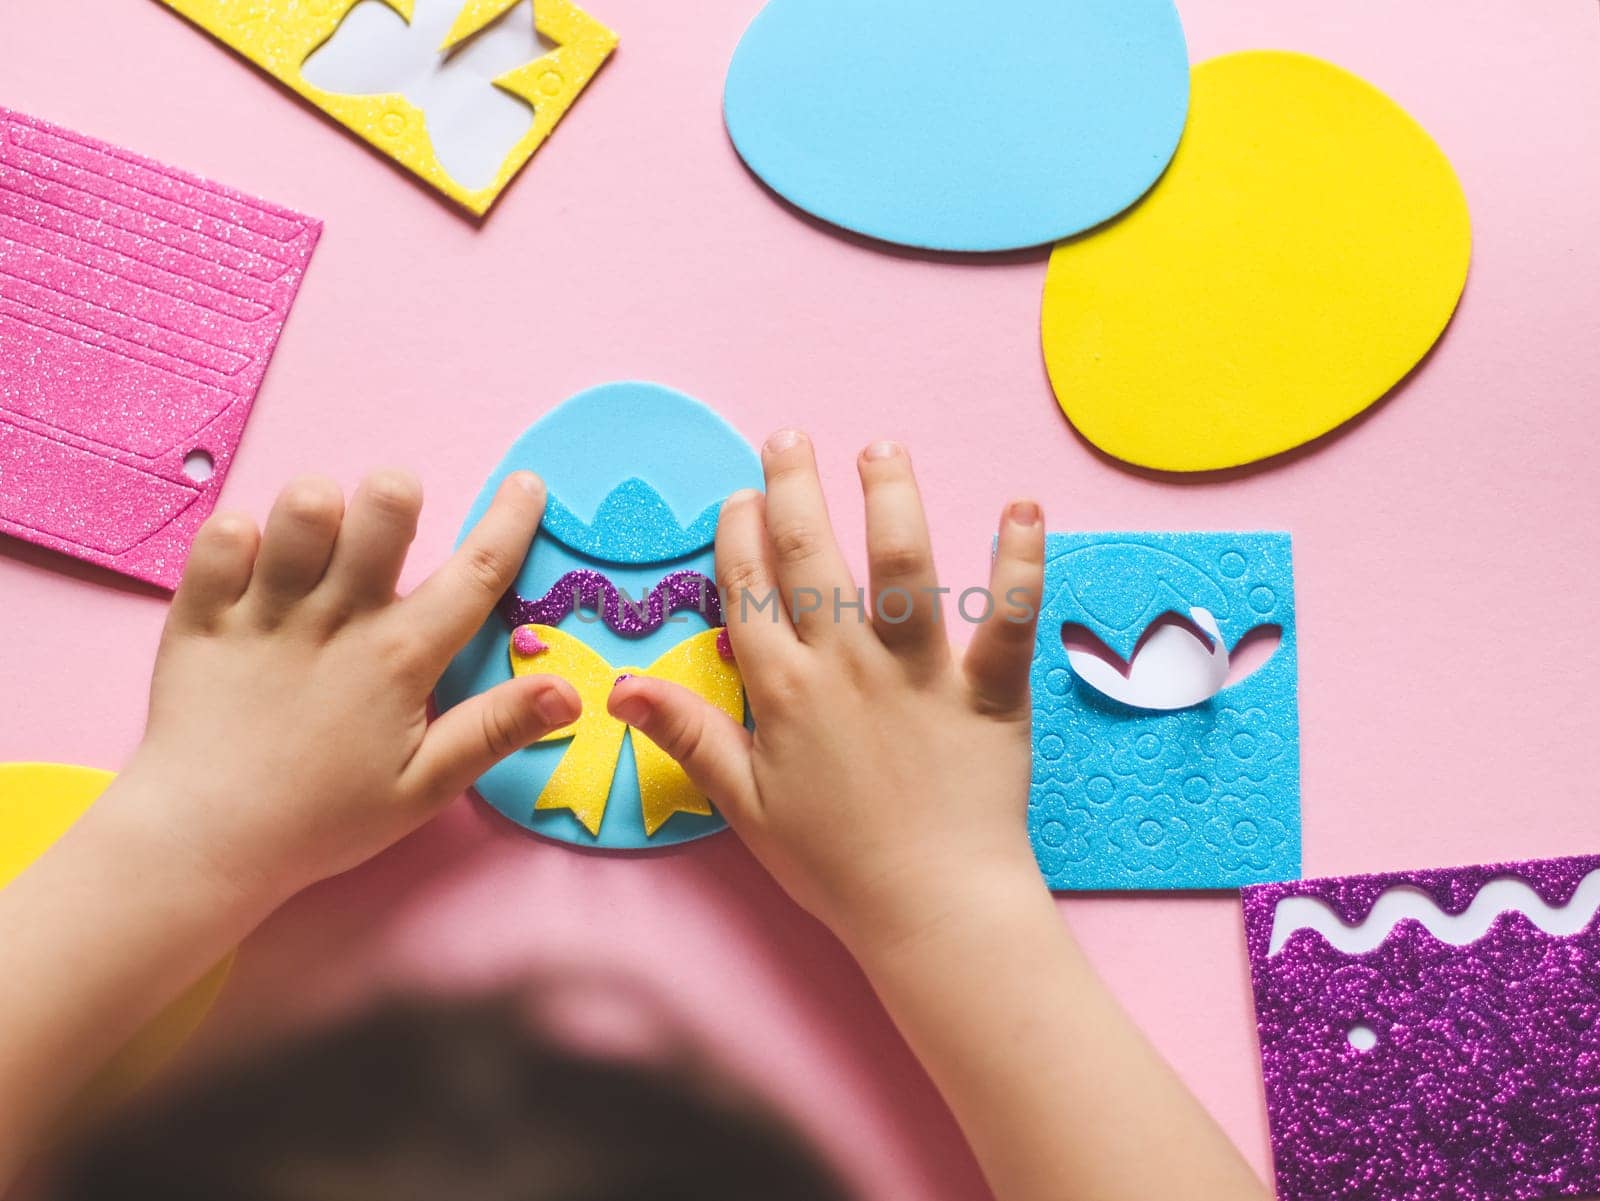 The hands of a little caucasian girl stick a hat sticker on a blue felt egg with a lilac zigzag by Nataliya